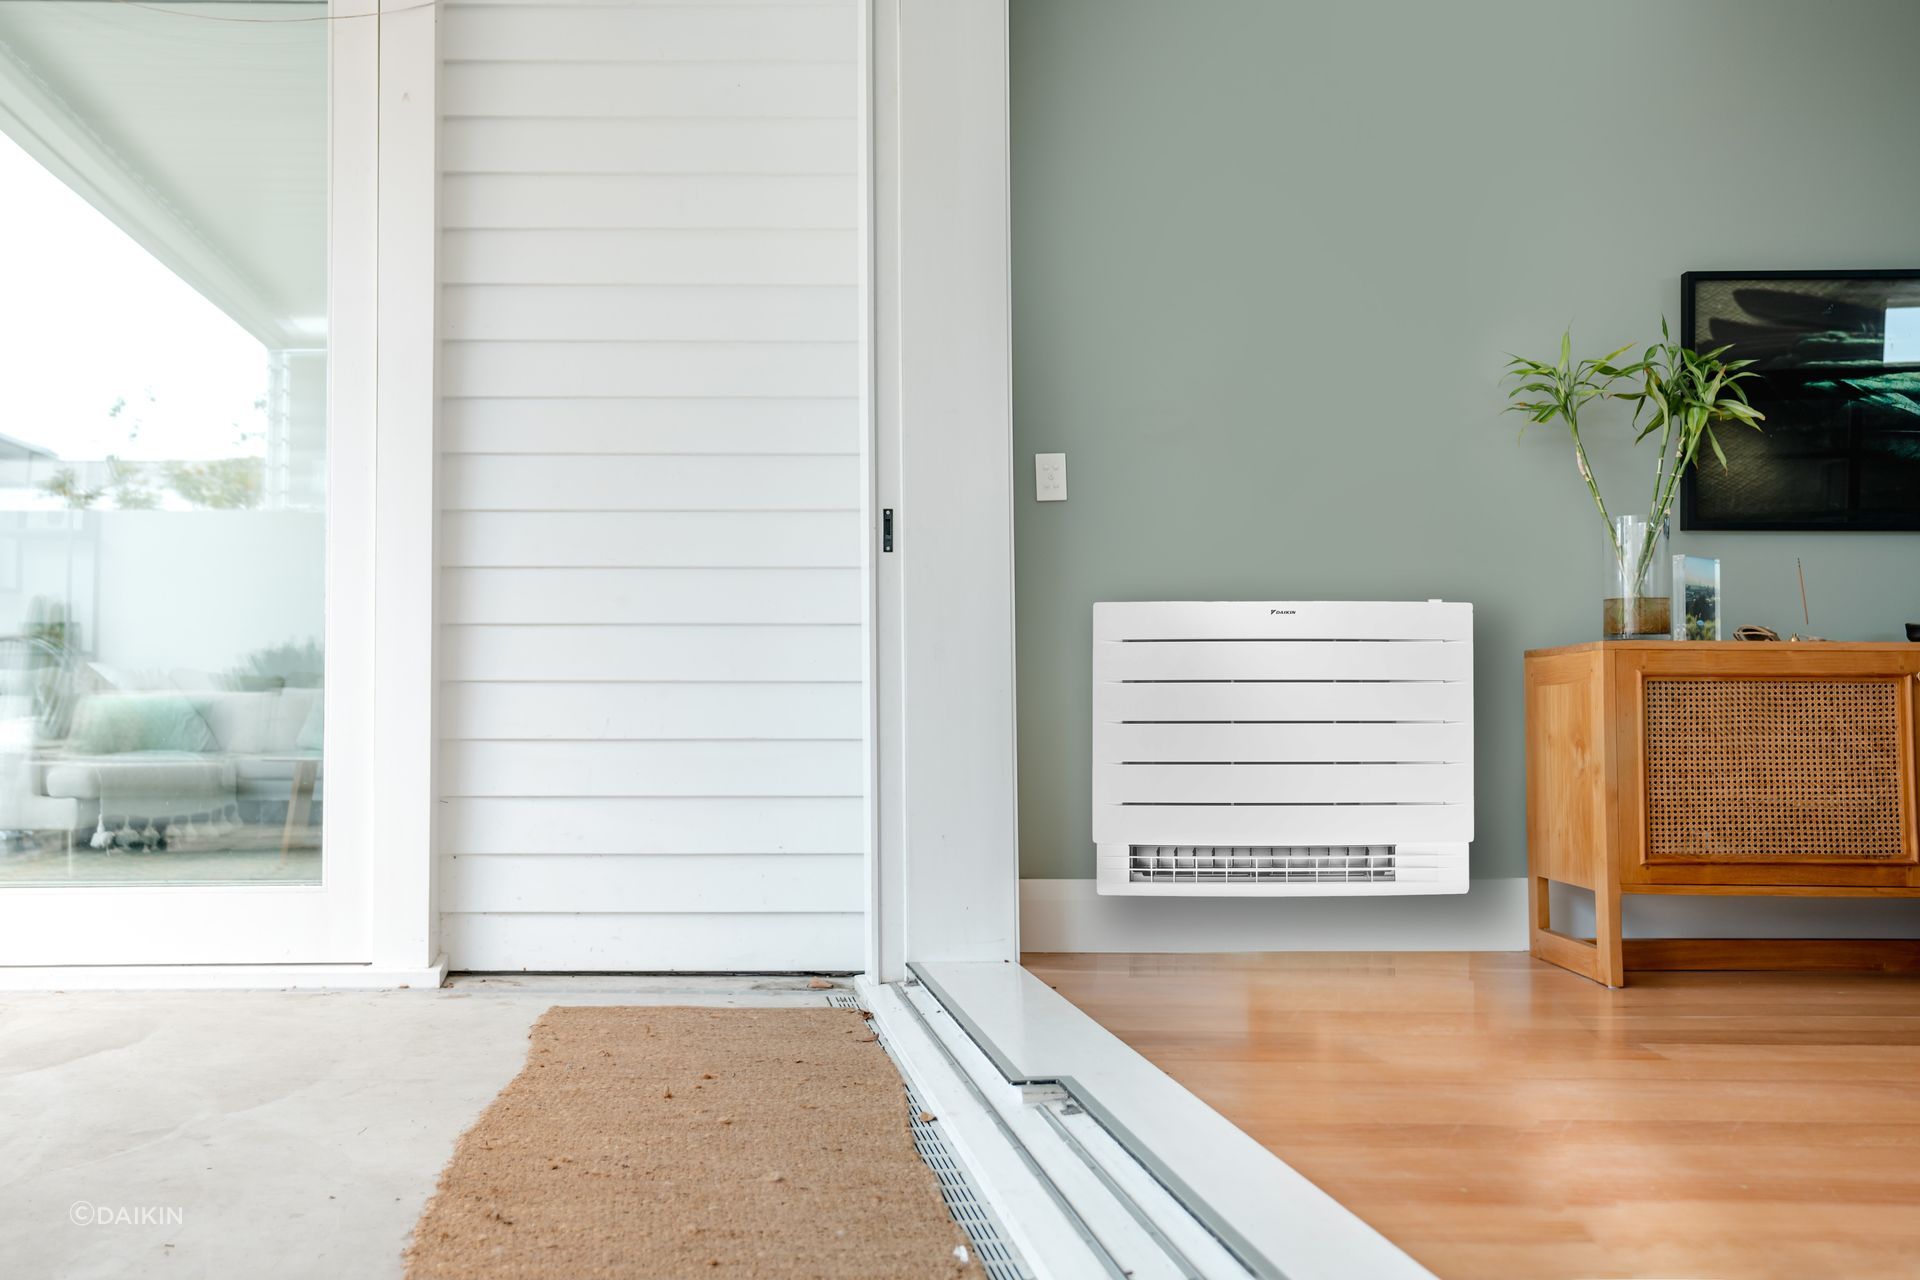 The Daikin Perfera is an elegantly designed floor standing heat pump that is whisper quiet, energy efficient, and provides fresh air quality in your home.